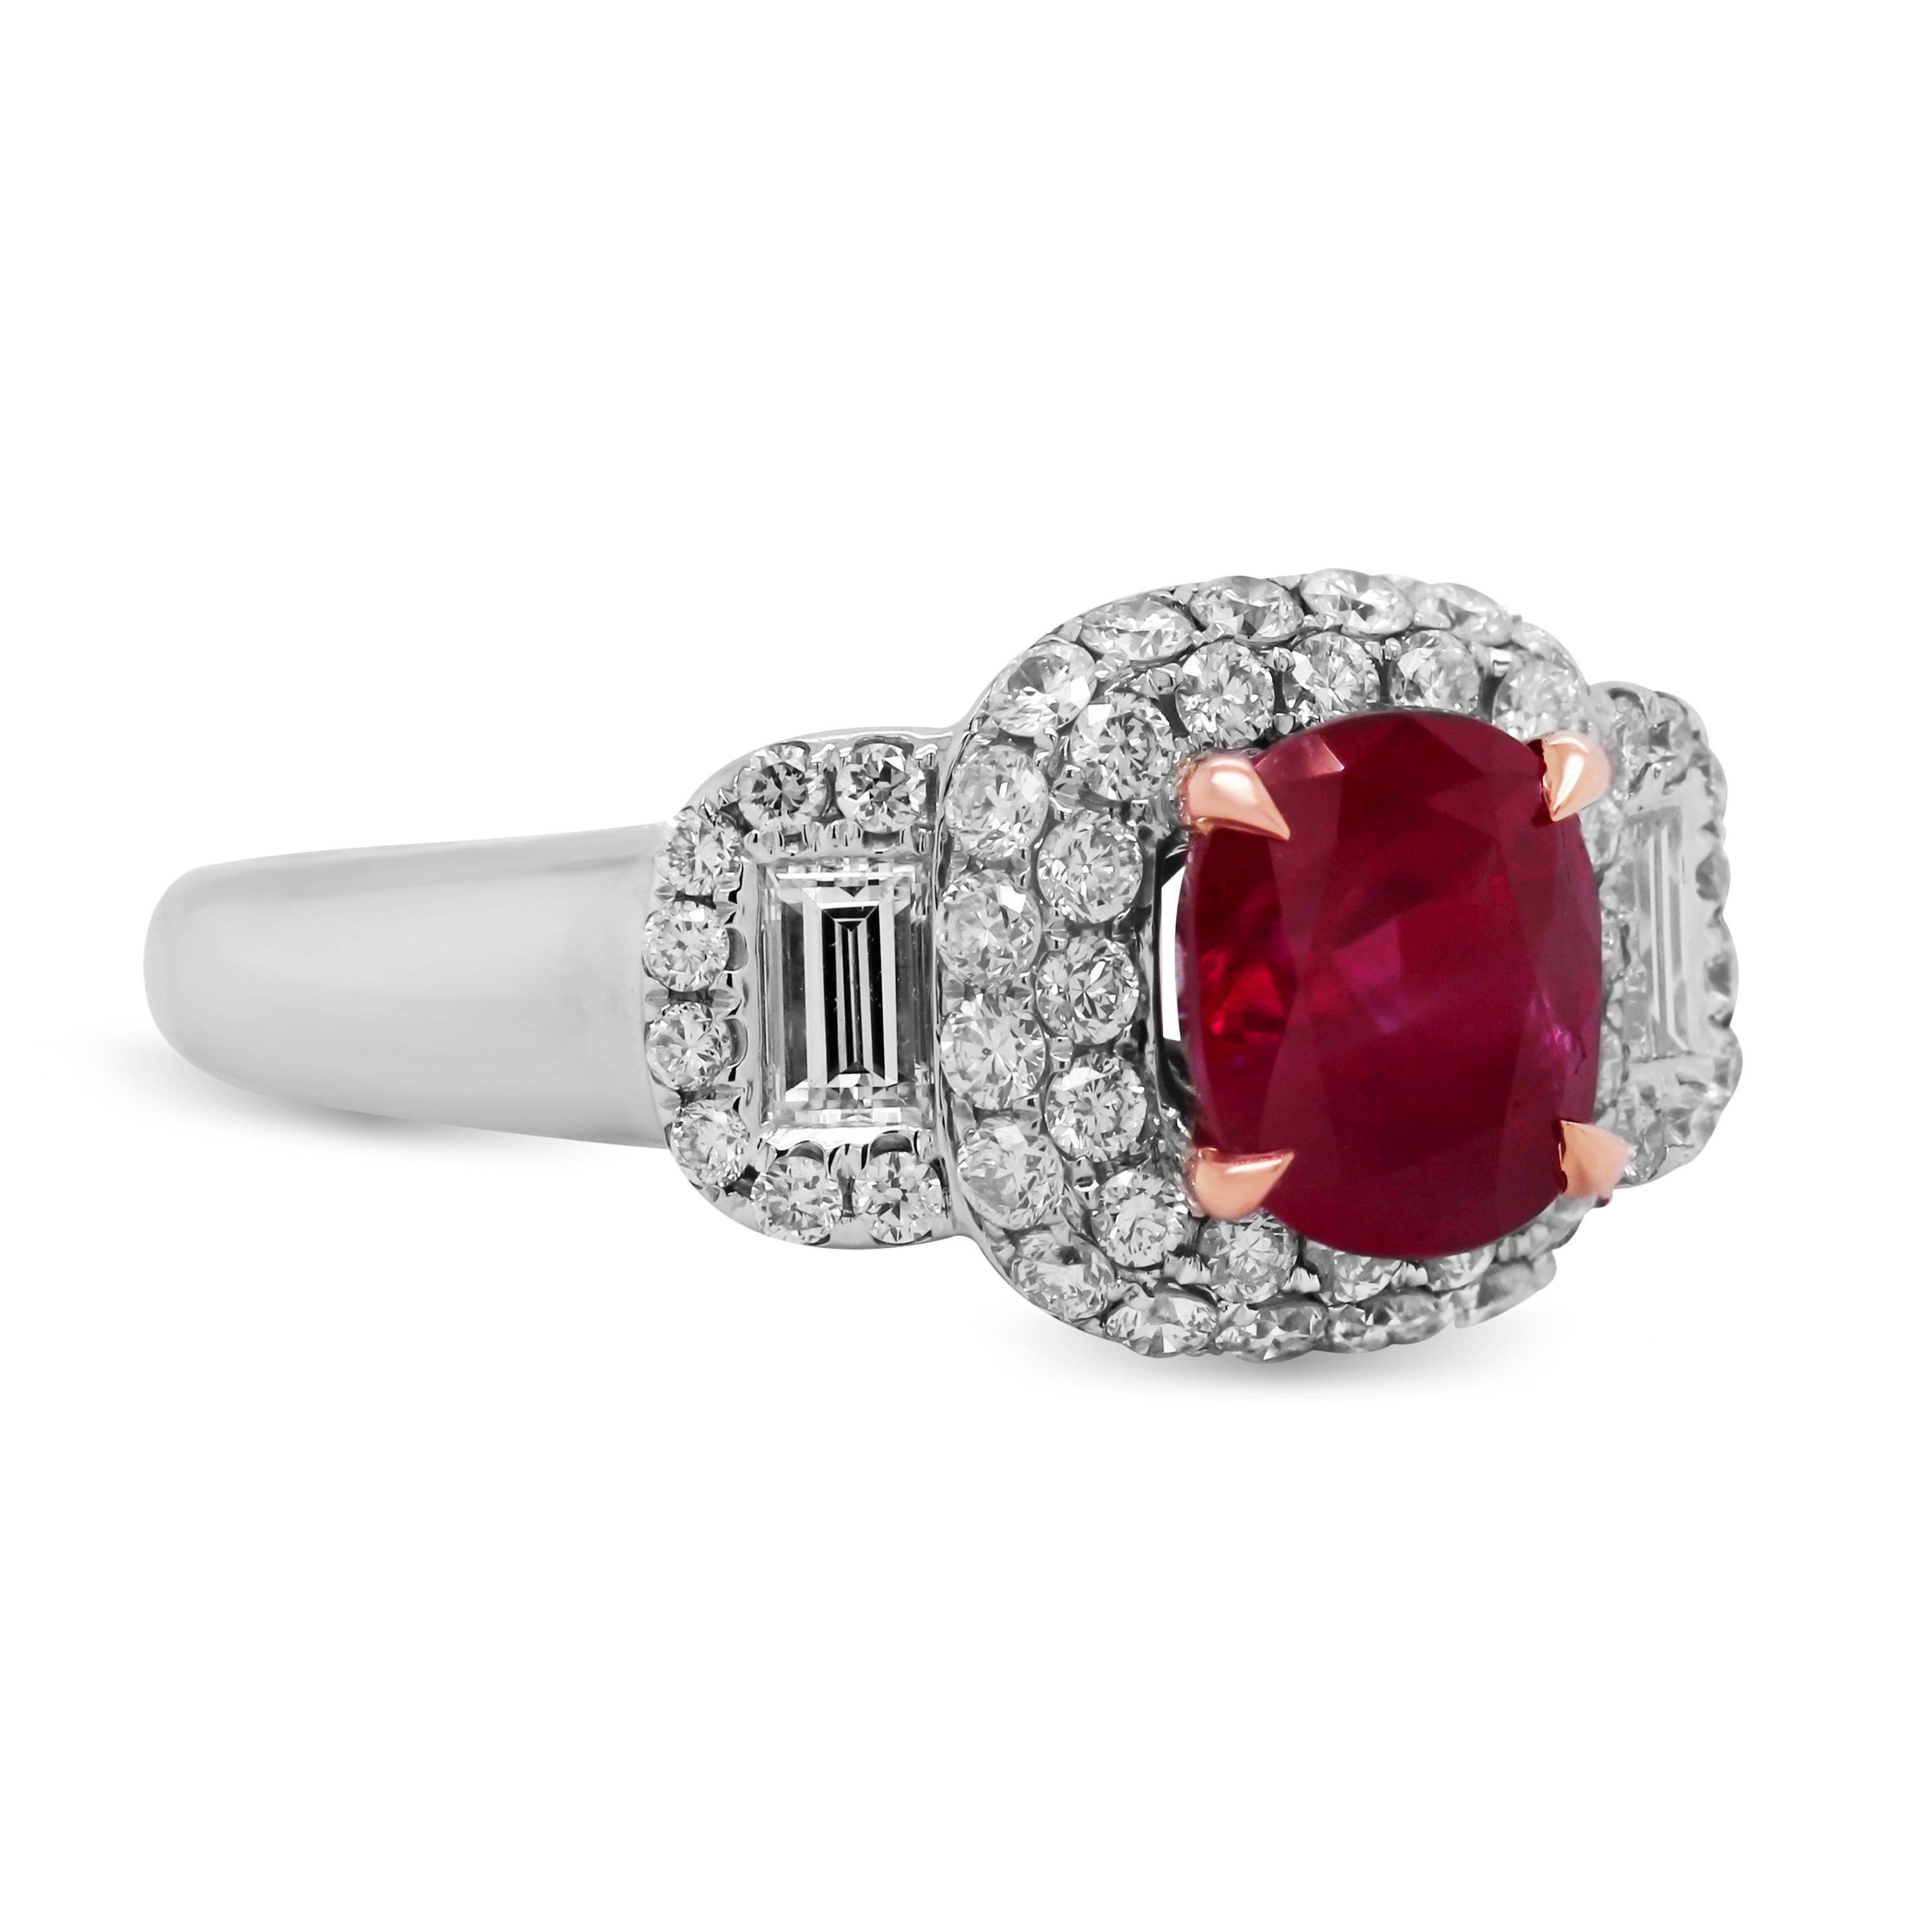 GIA Certified 1.78 Carat No Heat Burma Cushion Cut Ruby Diamond 18K Gold Ring

The GIA report states no indication of heating with an origin from Burma (Myanmar). Ruby is a cushion-cut and has a vibrant red color. 

Ring has apprx. 1 carat in G